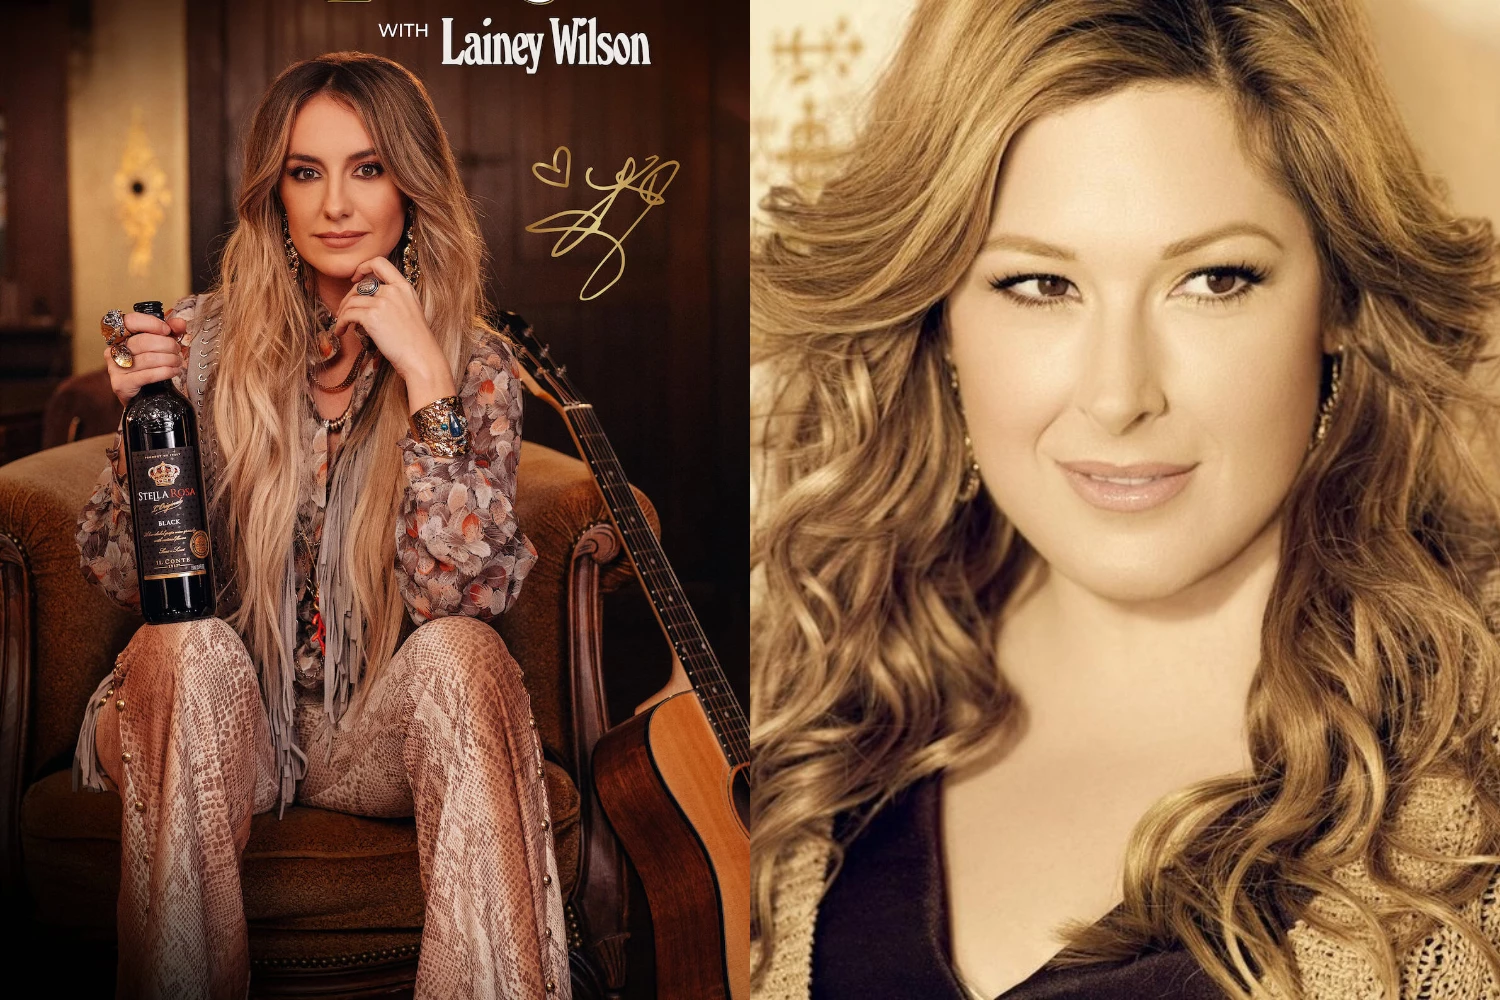 Conclusion - Is Lainey Wilson Related To Carnie Wilson?